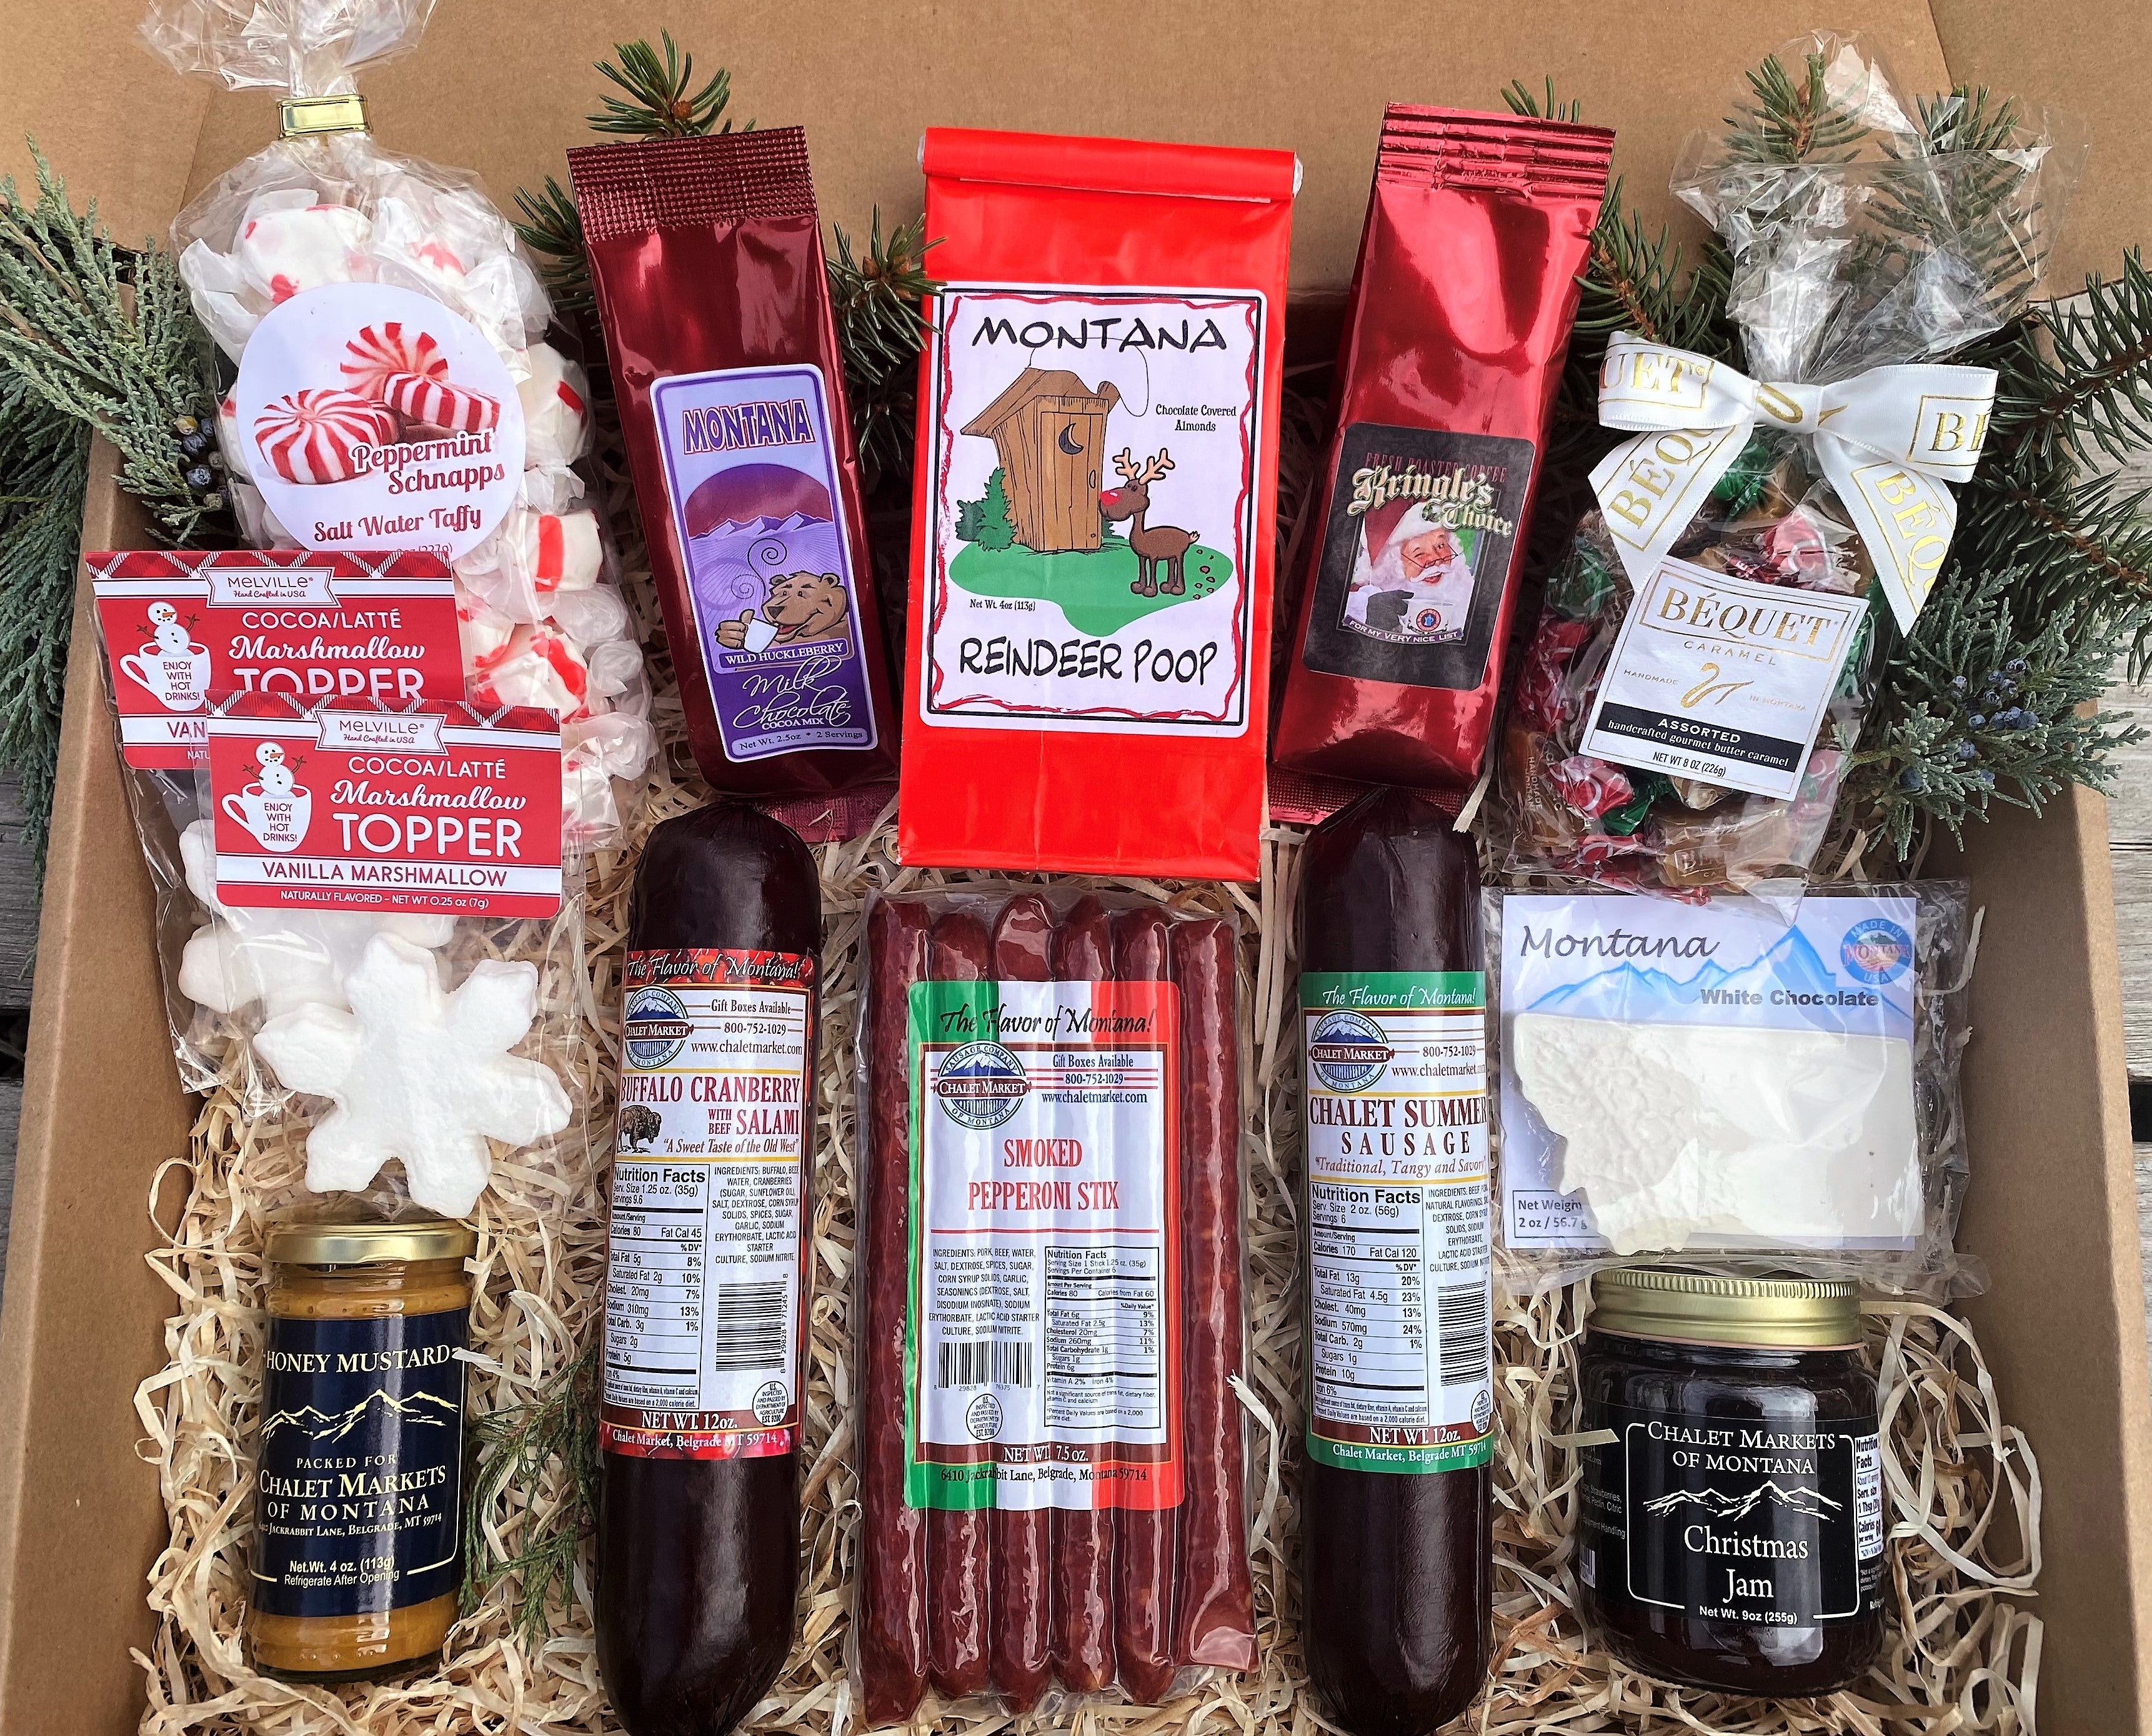 Montana Christmas Gift Box.  The perfect holiday gift for a family or office.  This gift offers a large assortment of Montana made gourmet food and Christmas themed goodies!  Made in Montana.